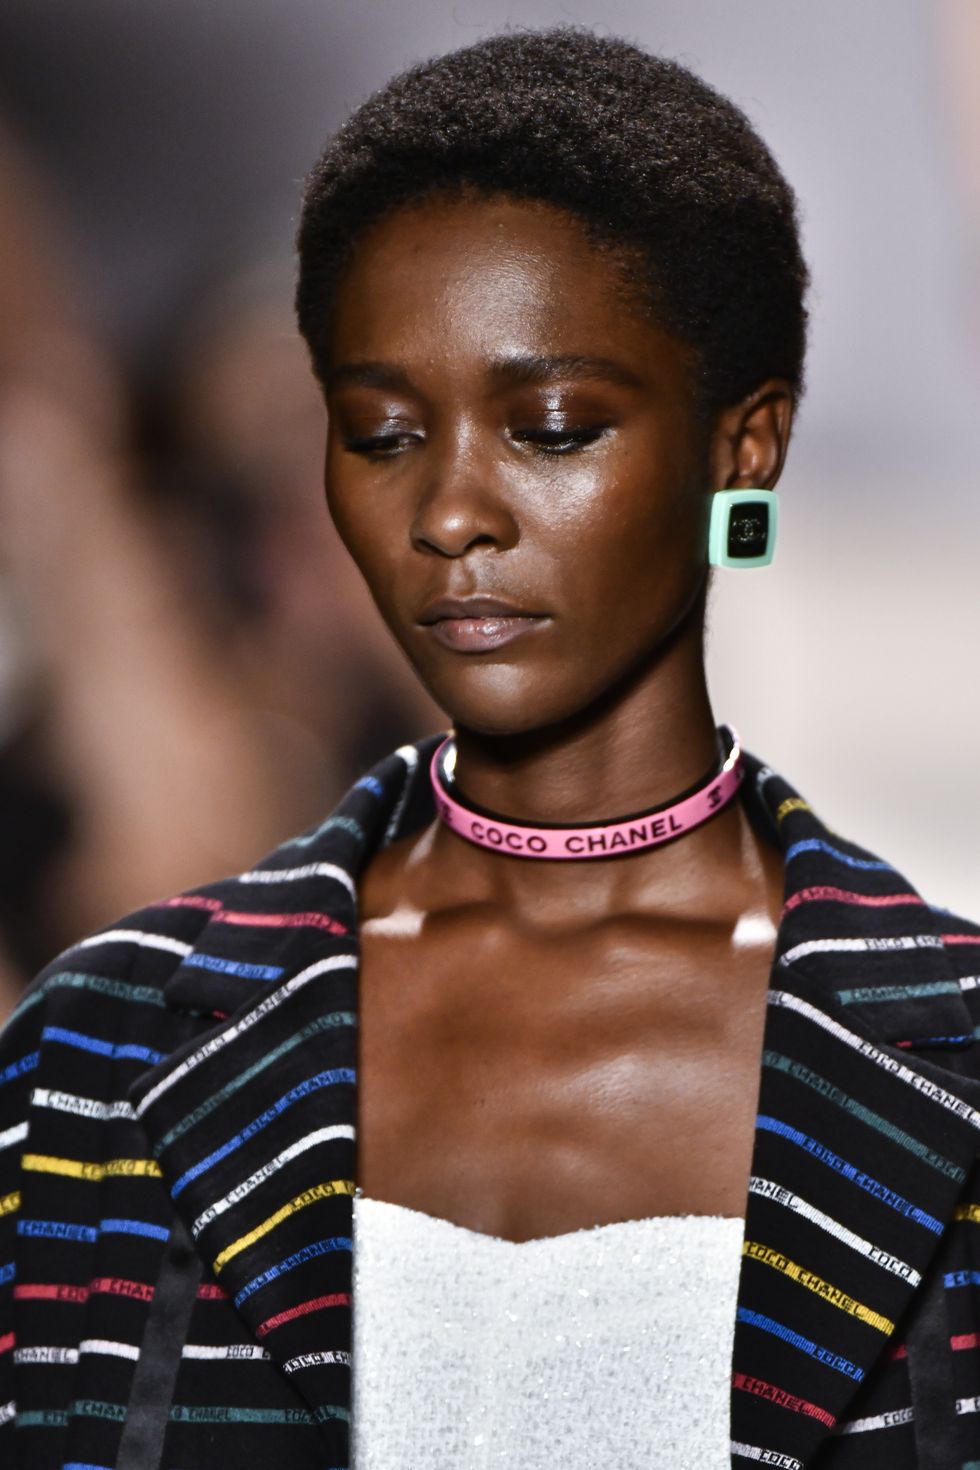 How to wear your earrings in 2020? The answer with CHANEL's style